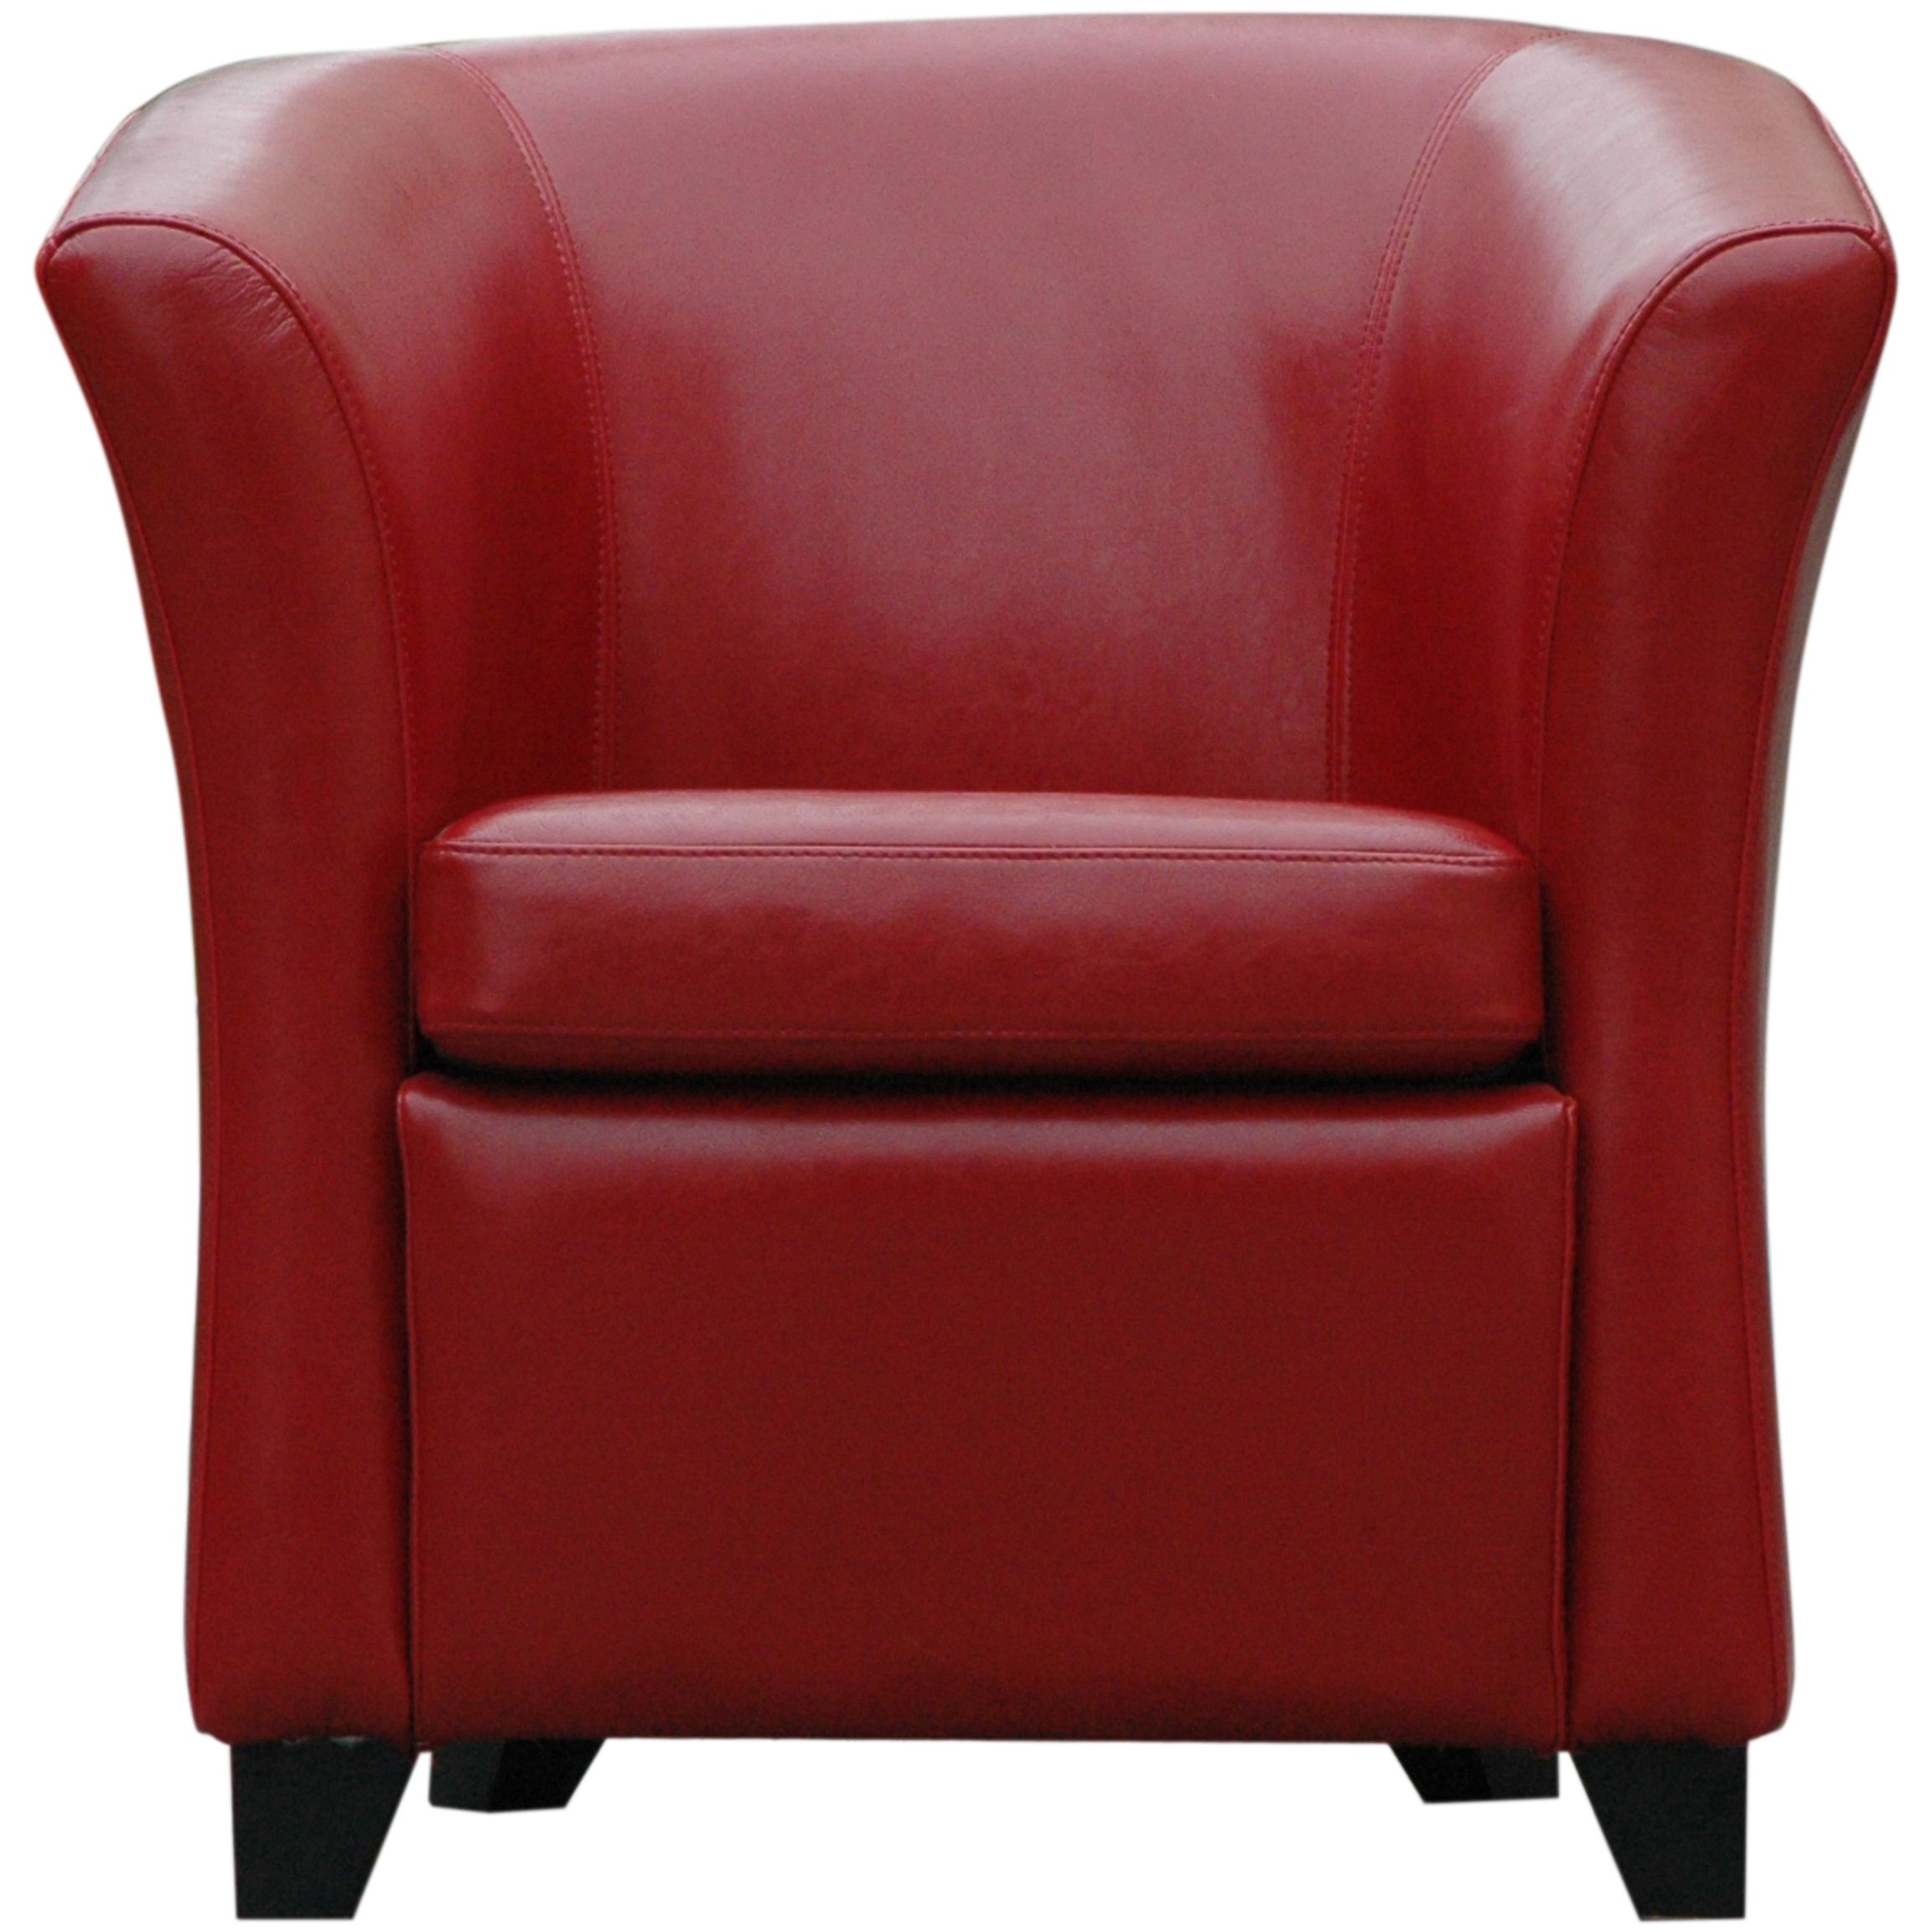 Romeo Leather Club Chair, Red